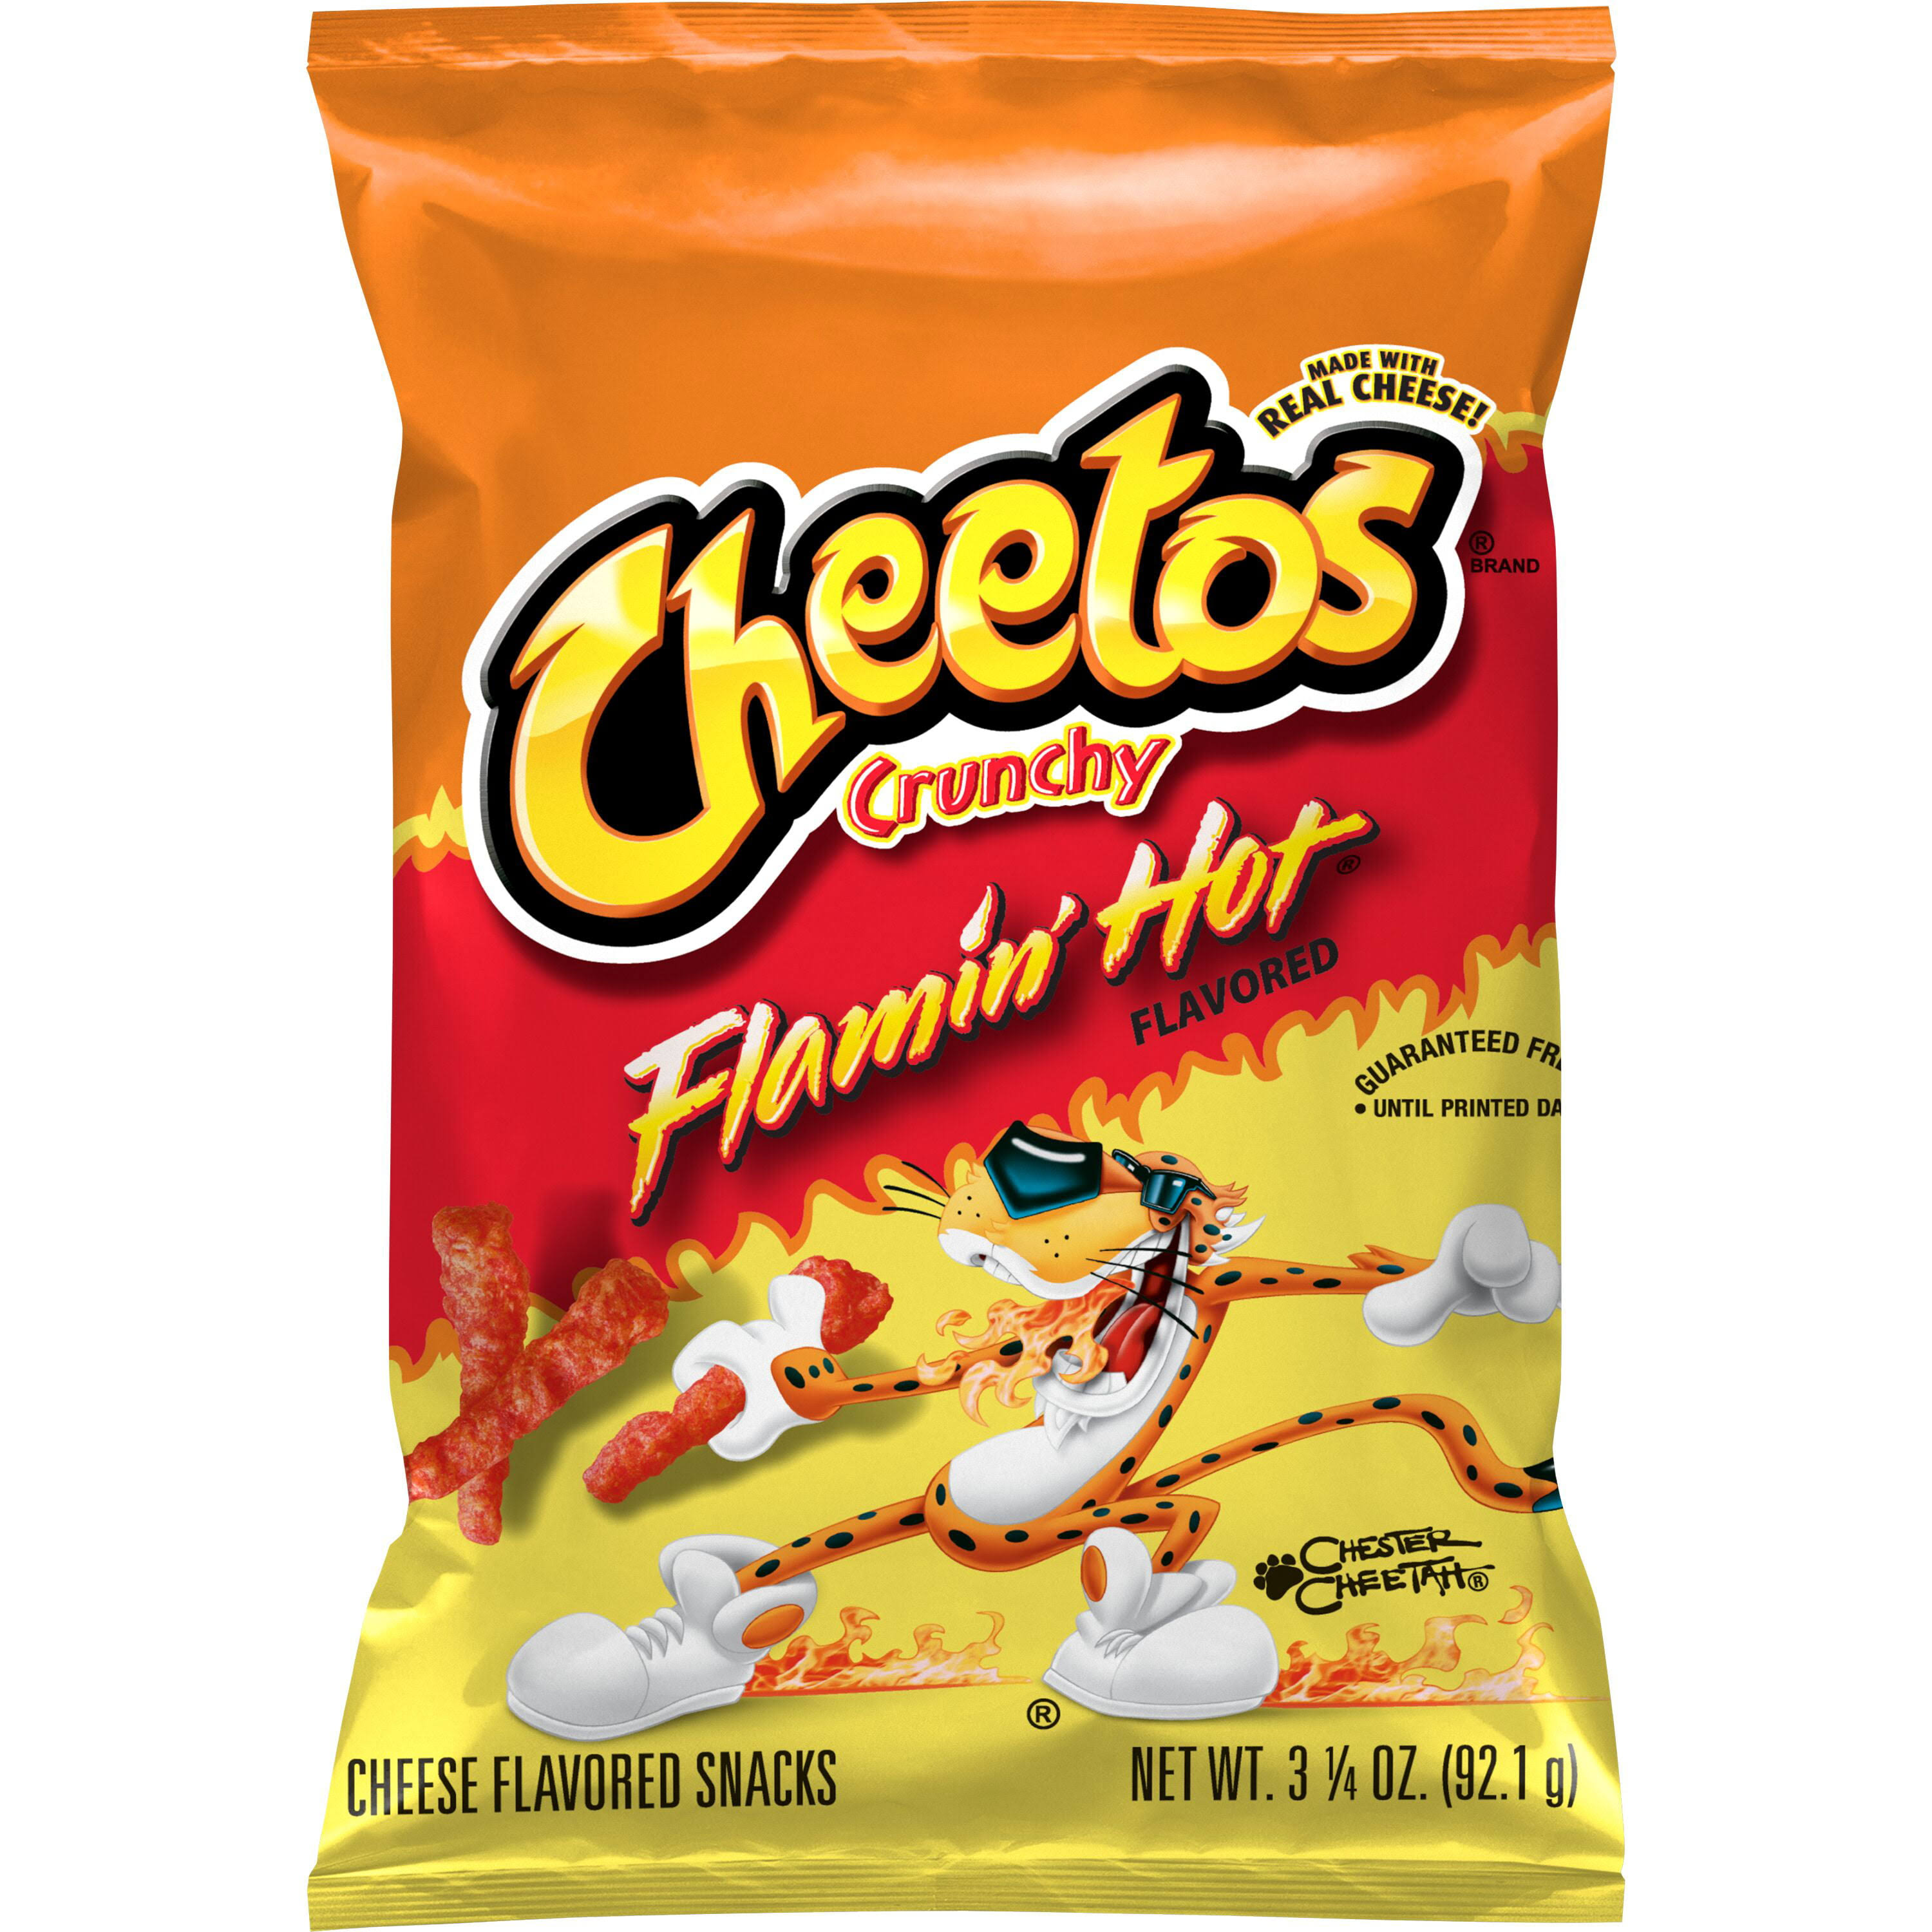 Cheetos Cheese Flavored Snacks, Flamin' Hot Flavored, Crunchy - 3.25 oz